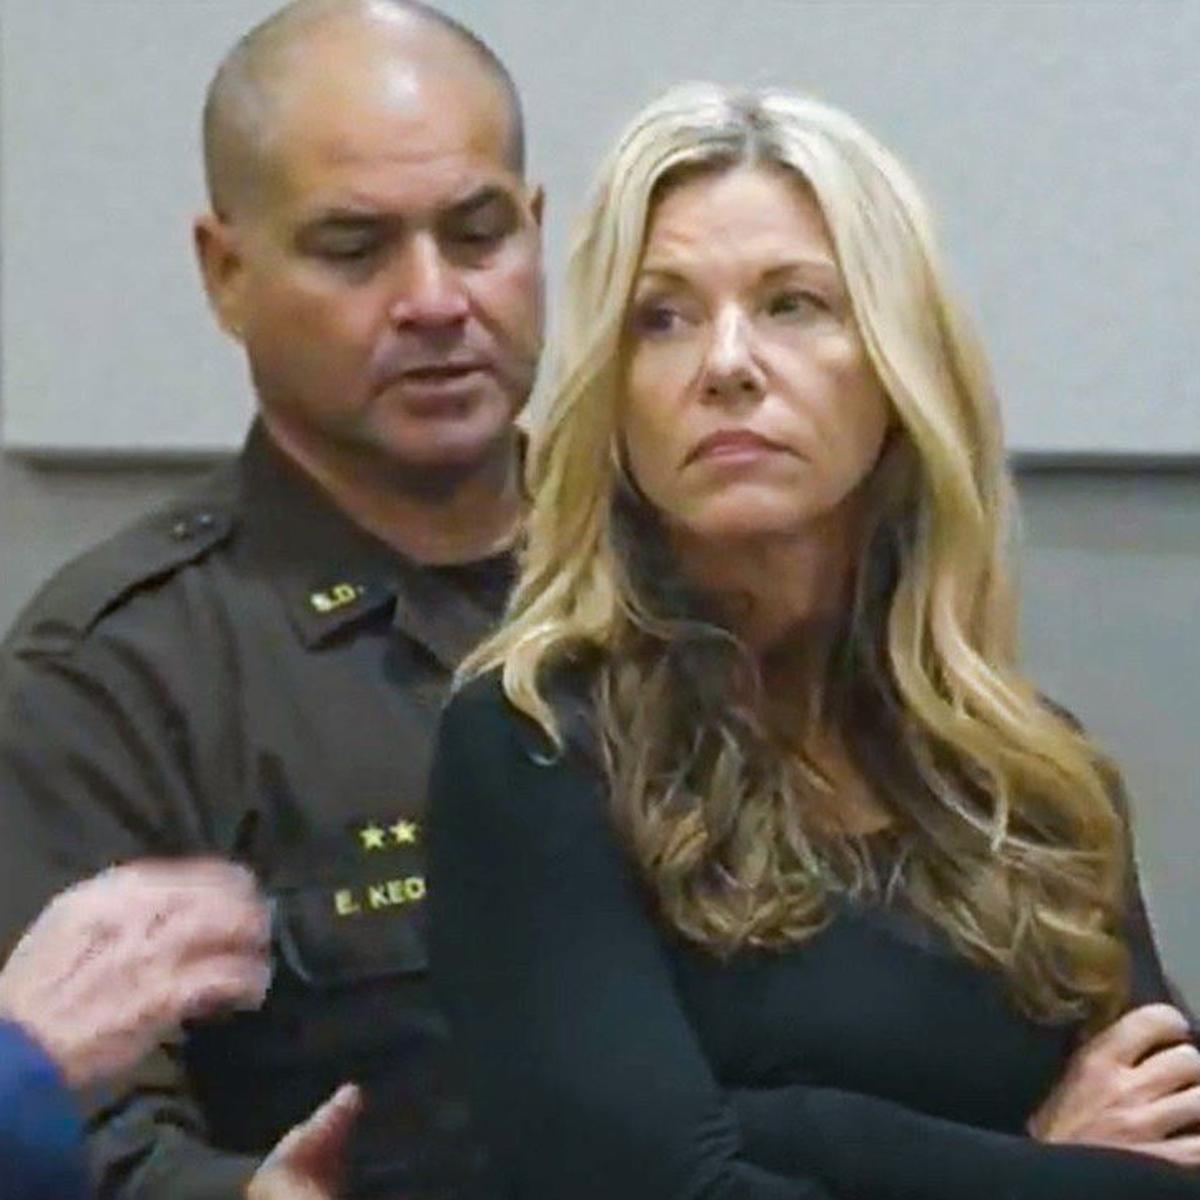 Lori Vallow says she 'was going to murder' in new recording | Local News |  postregister.com